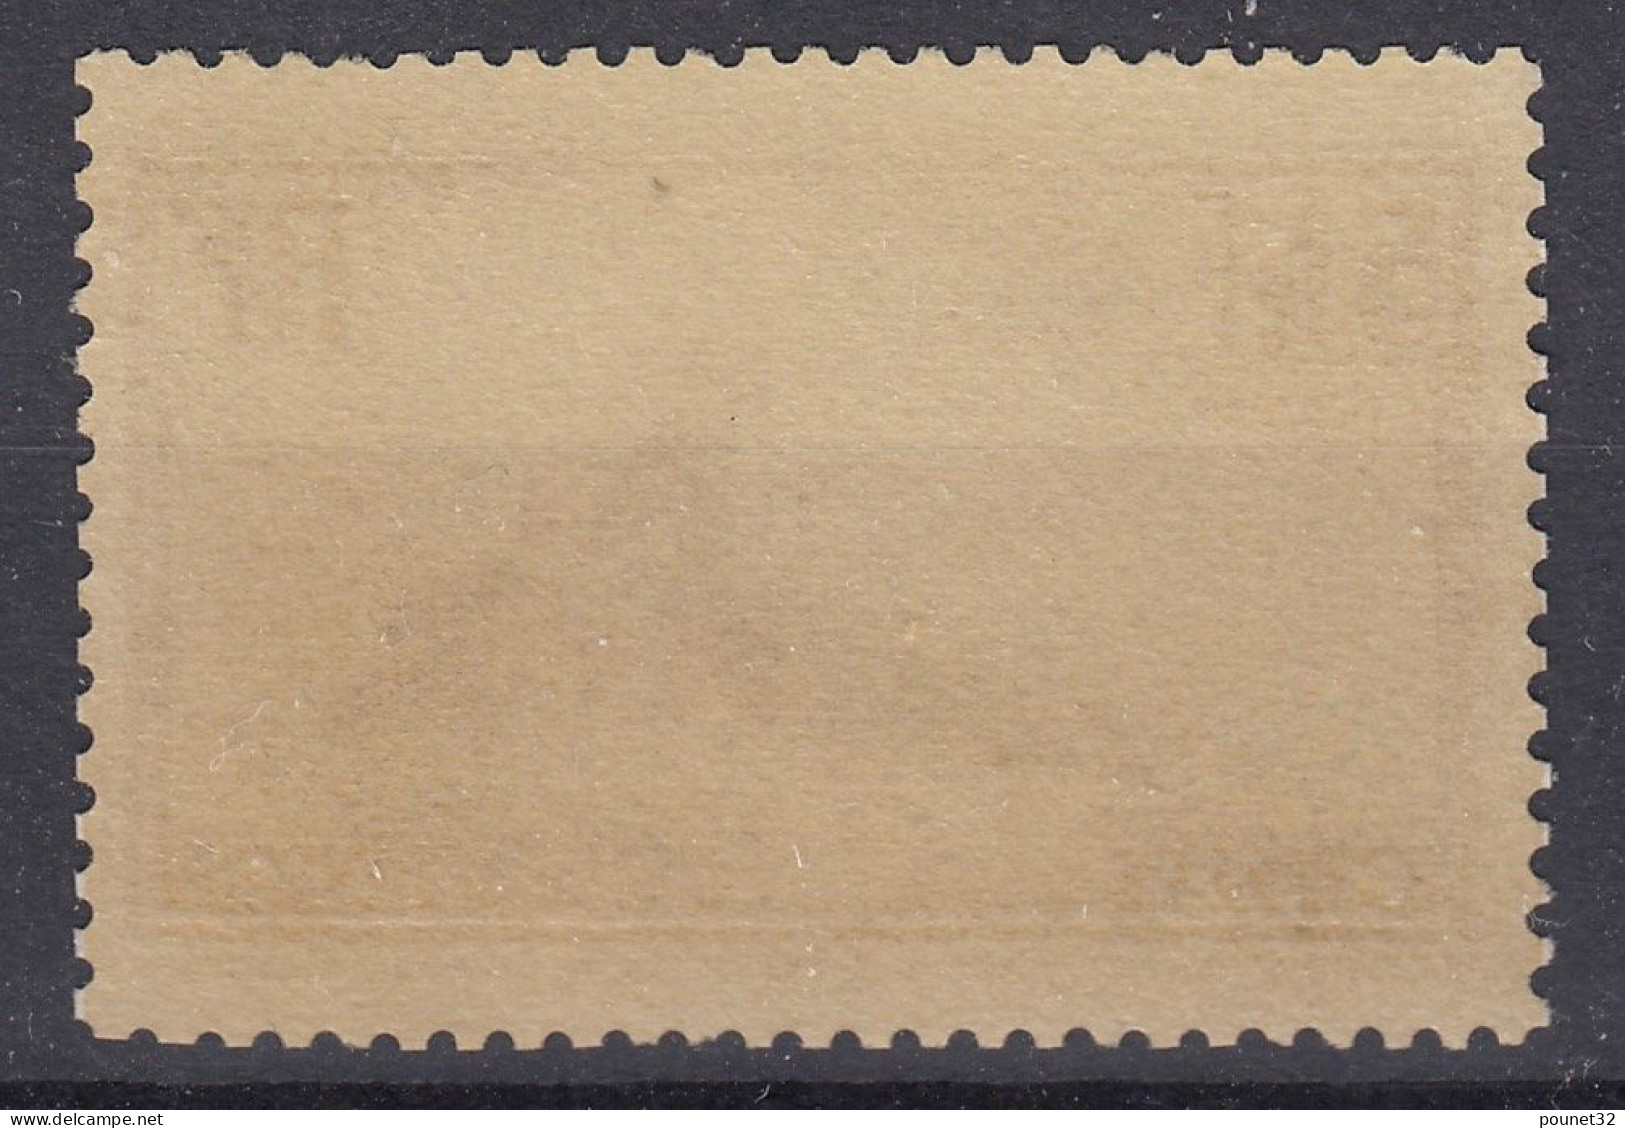 TIMBRE FRANCE MONT ST MICHEL N° 260a TYPE I NEUF ** GOMME SANS CHARNIERE - Ongebruikt